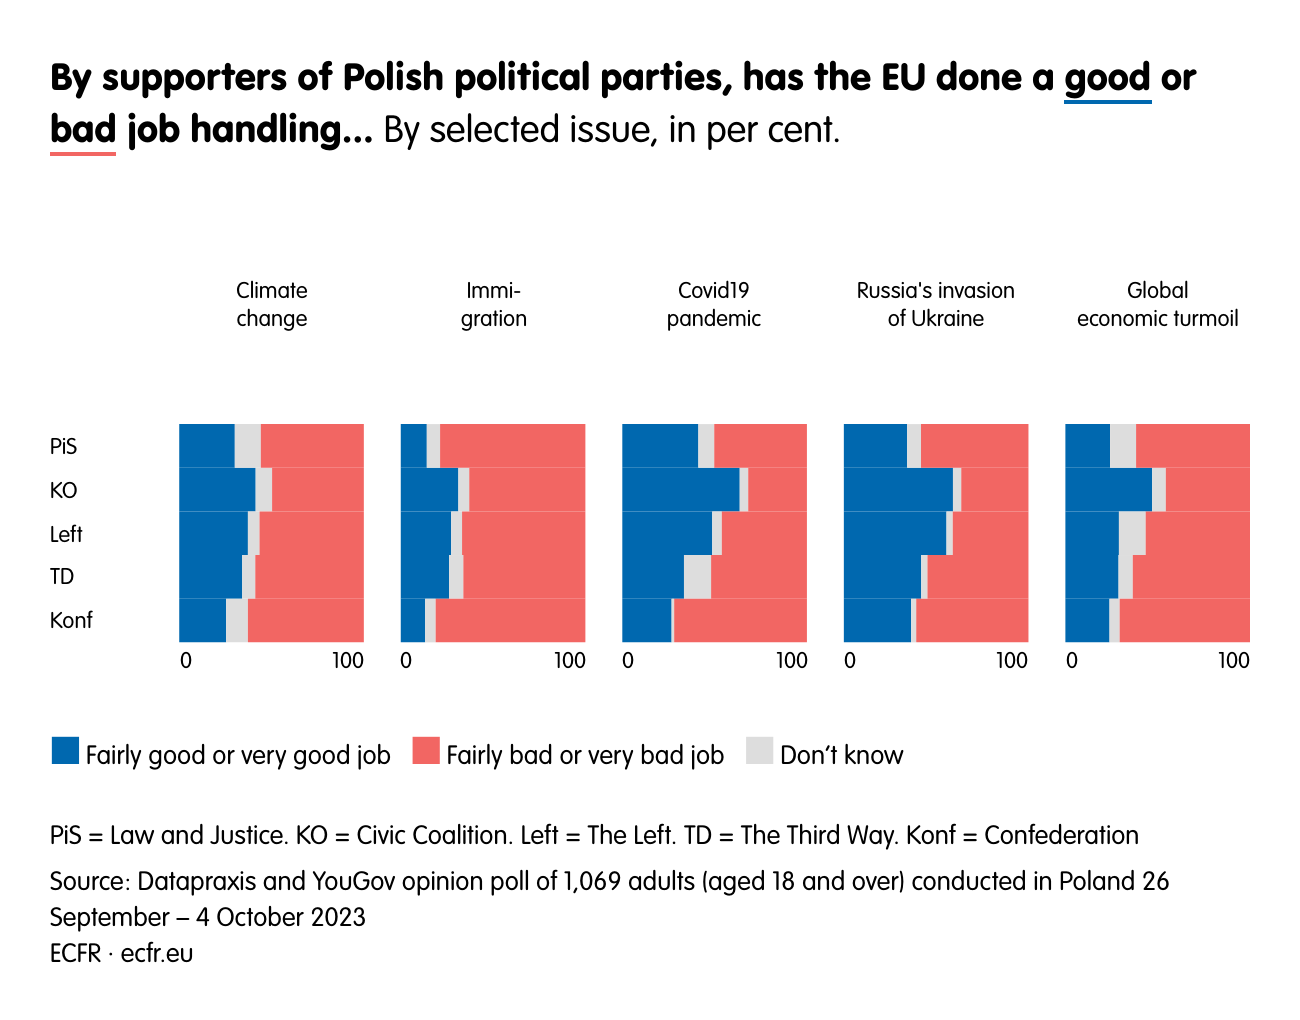 By supporters of Polish political parties, has the EU done a good or bad job handling…